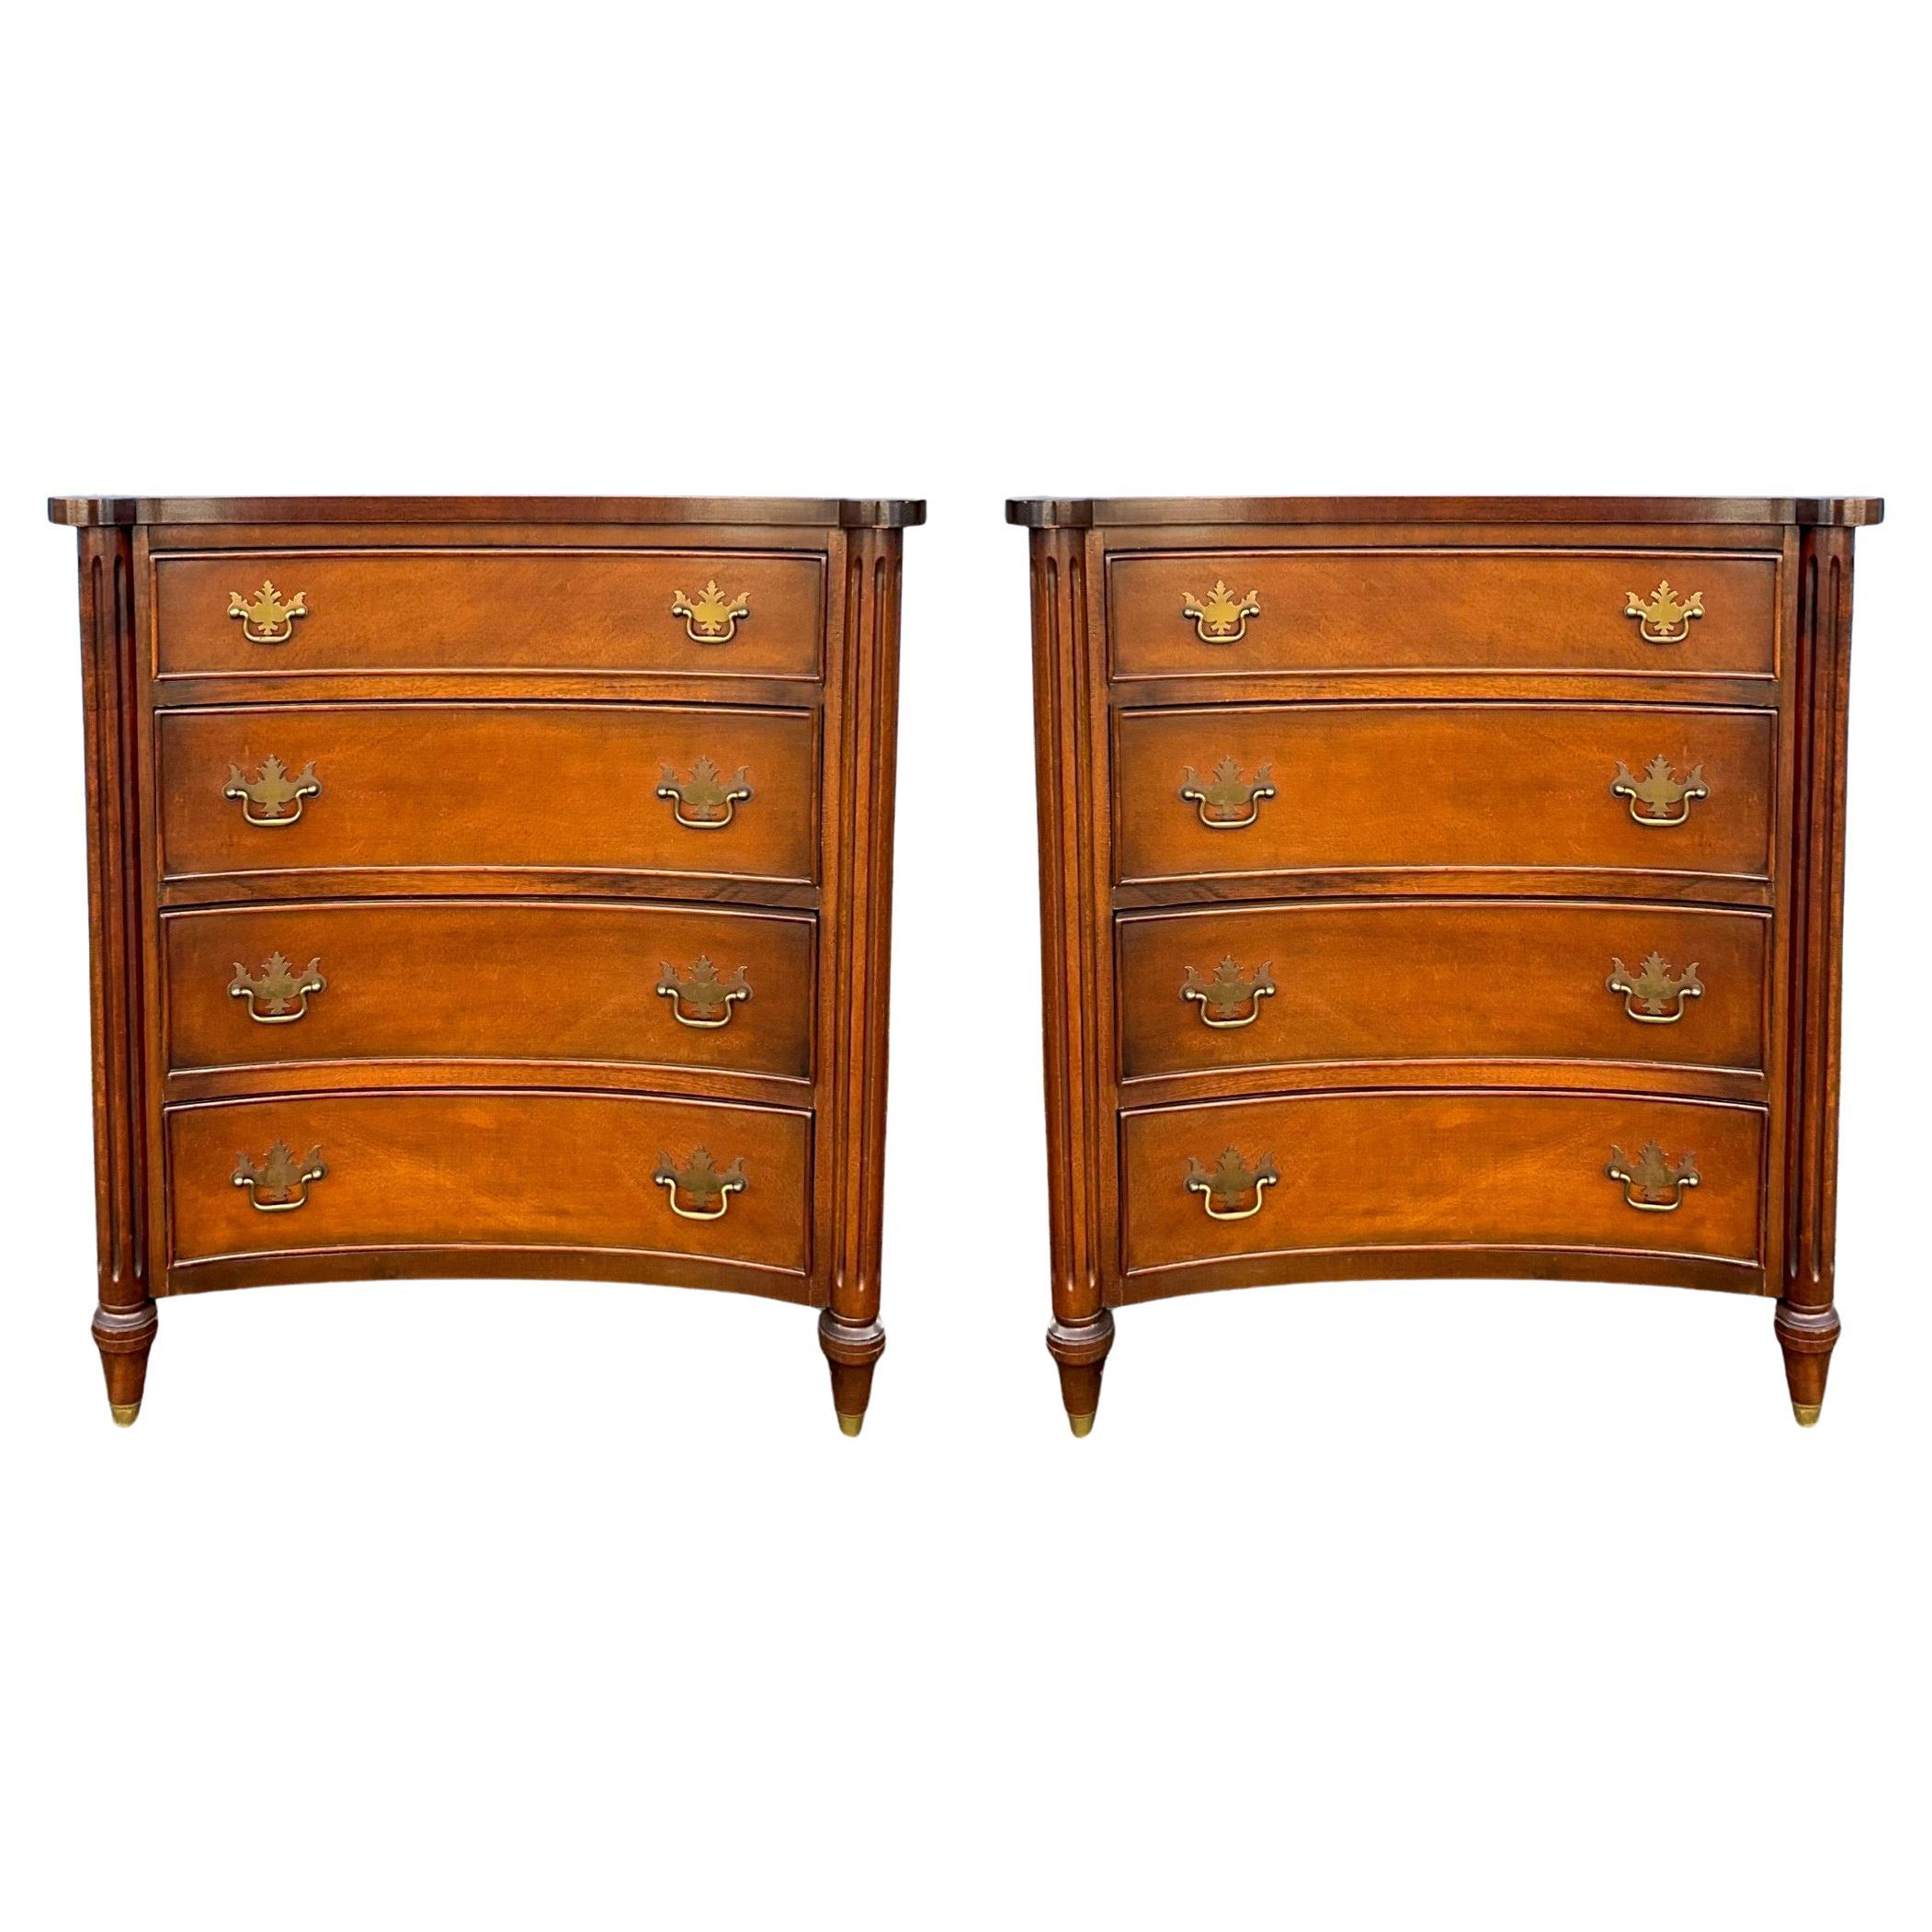 1940s Diminutive Chinese Chippendale Style Mahogany Chests by Schell, Pair